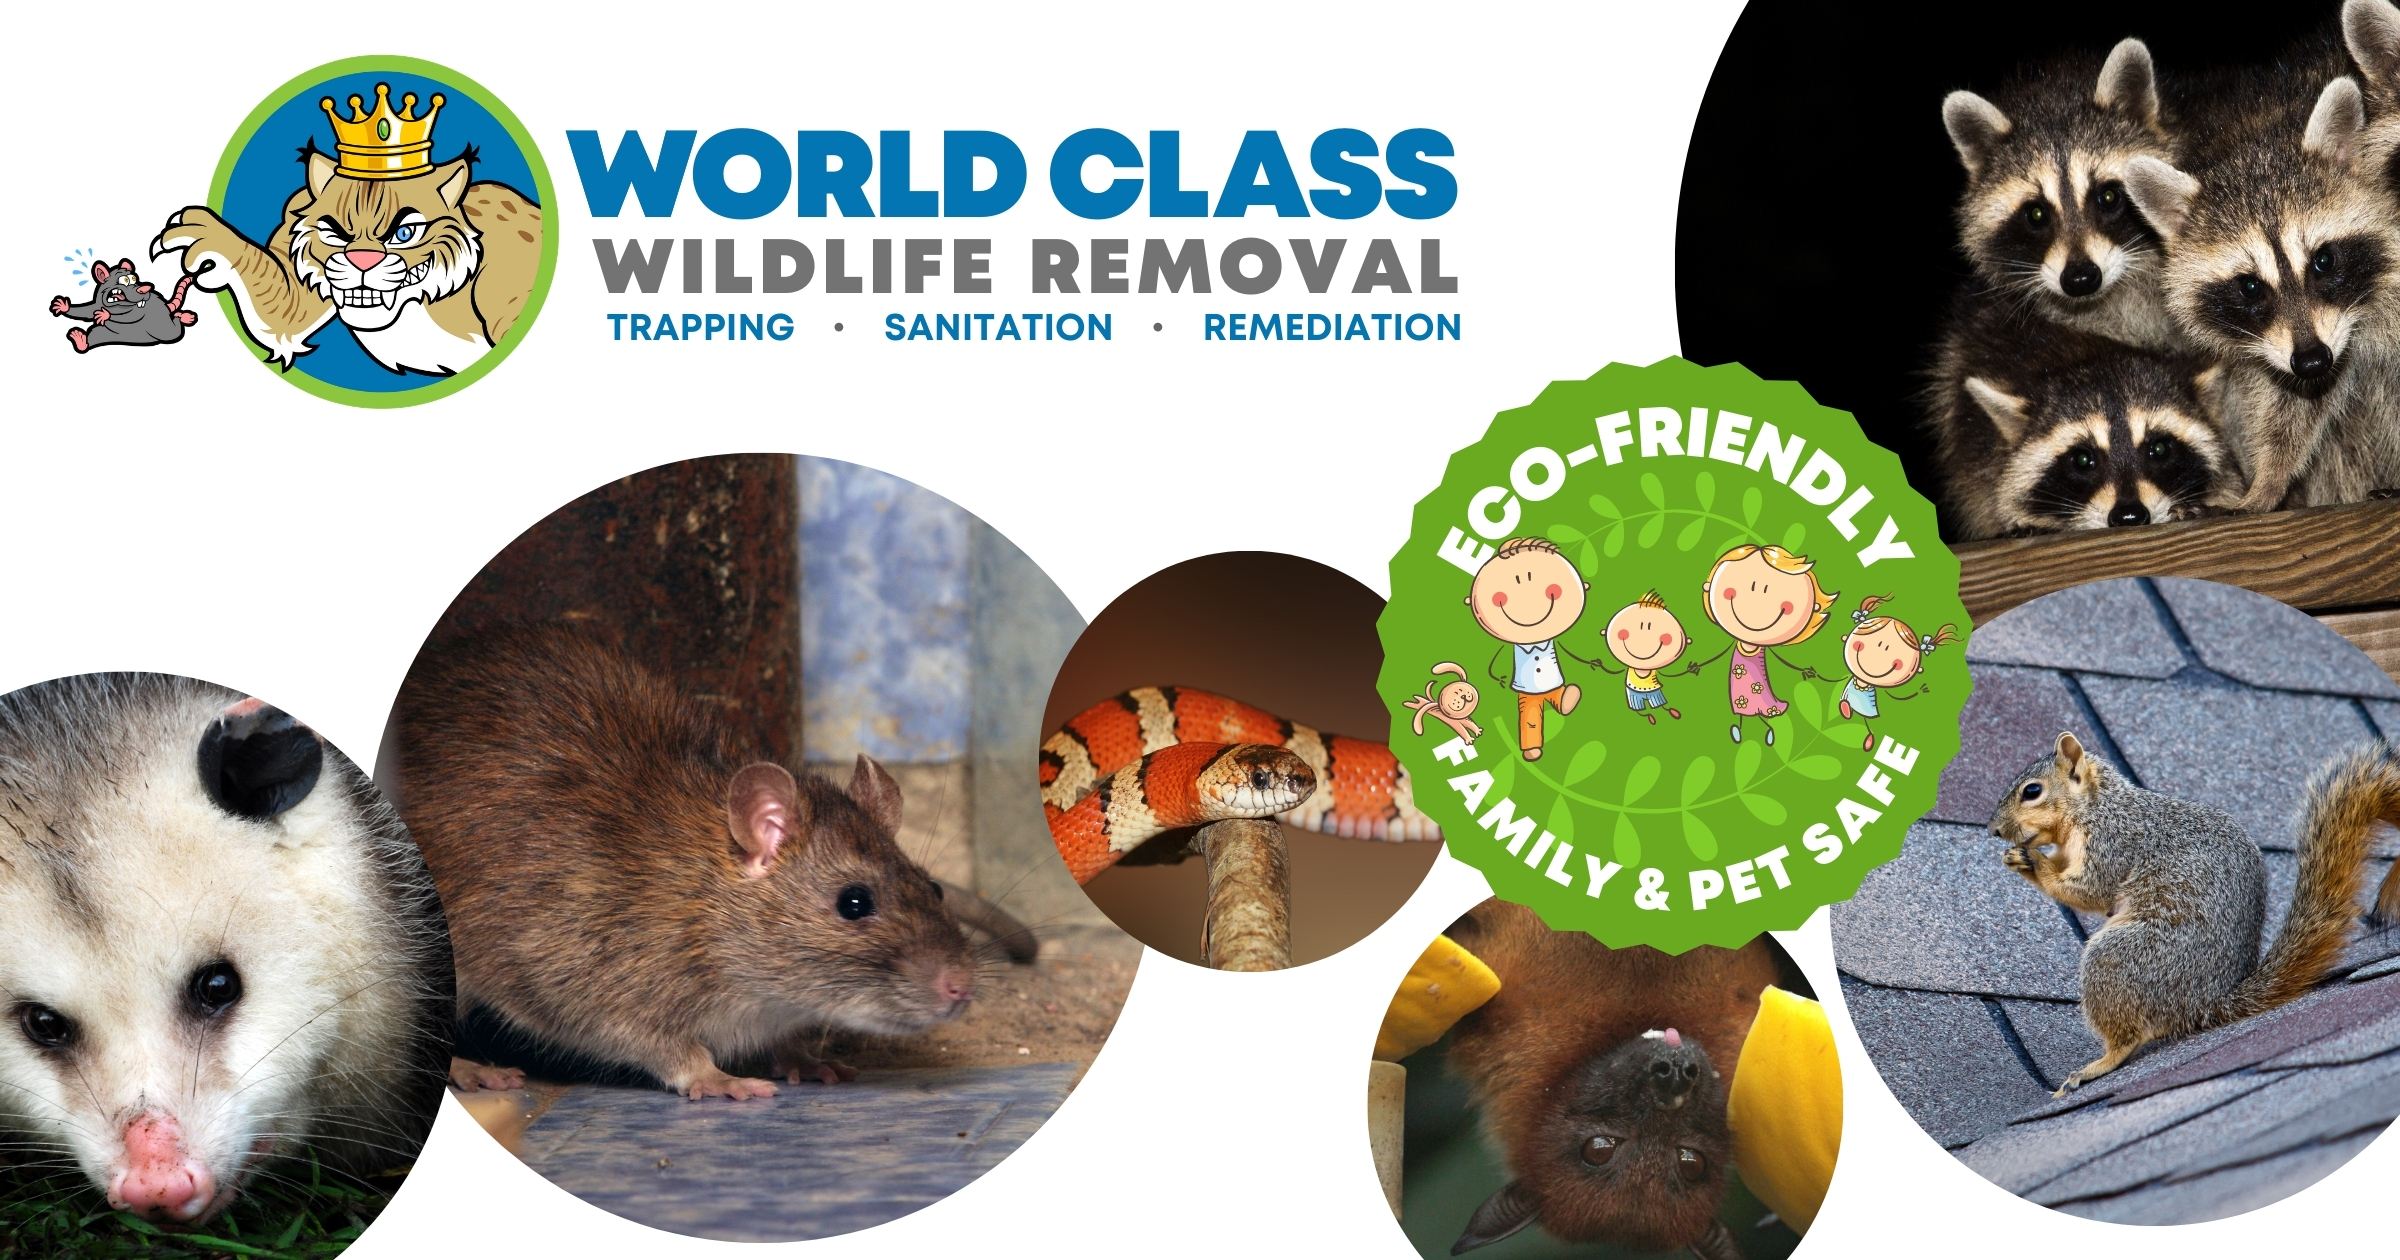 Professional Wildlife Removal Tampa - Pro Wildlife Removal